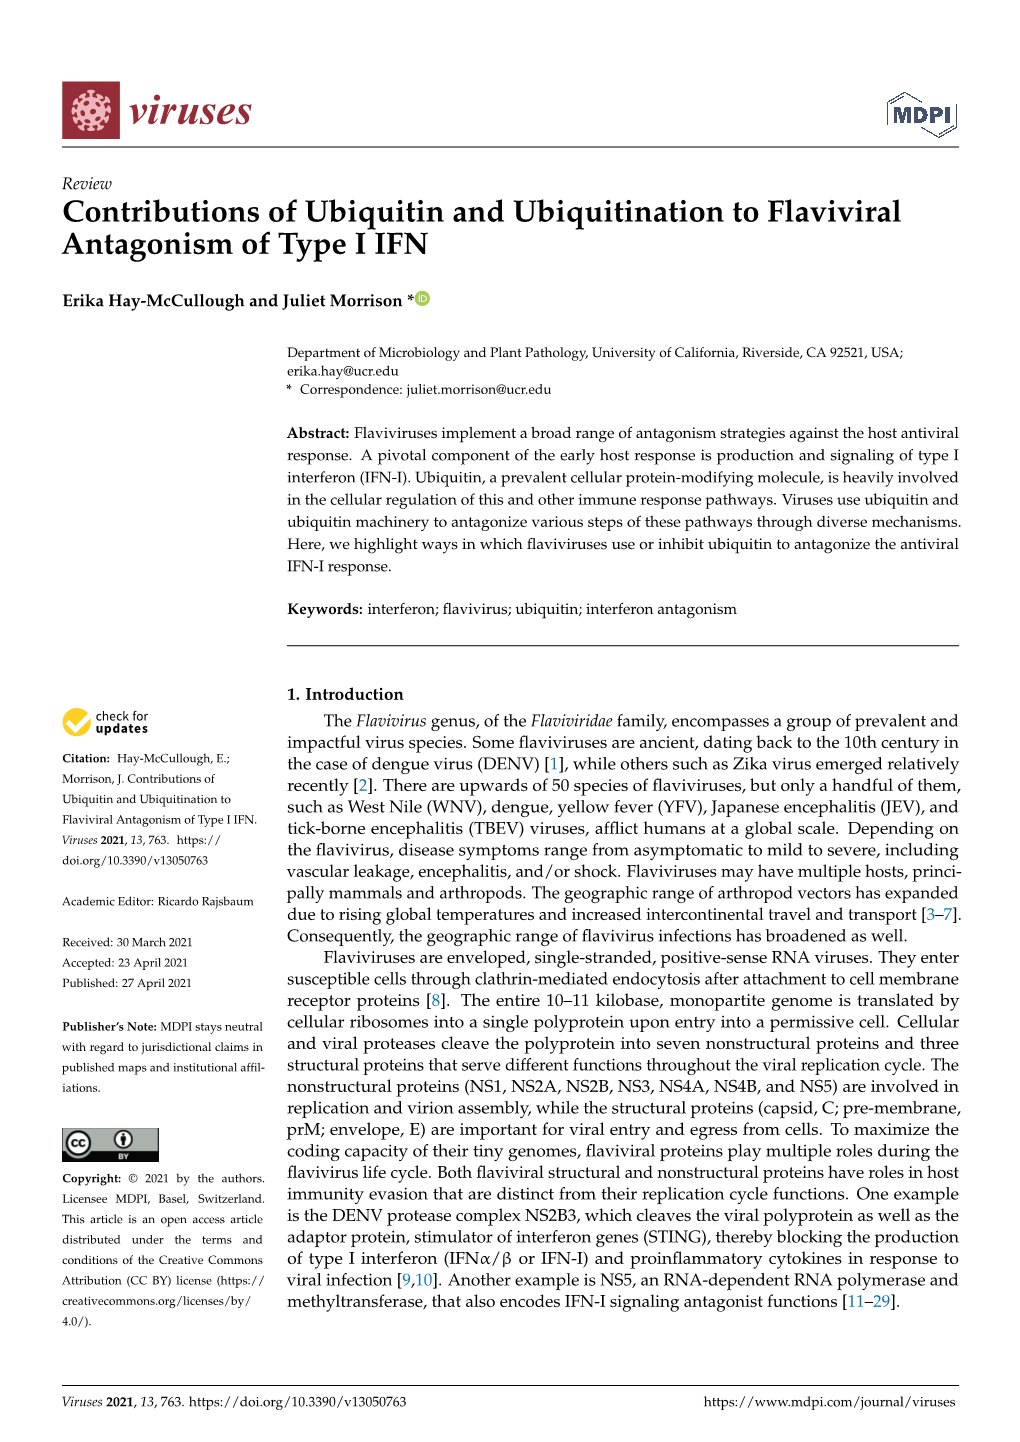 Contributions of Ubiquitin and Ubiquitination to Flaviviral Antagonism of Type I IFN